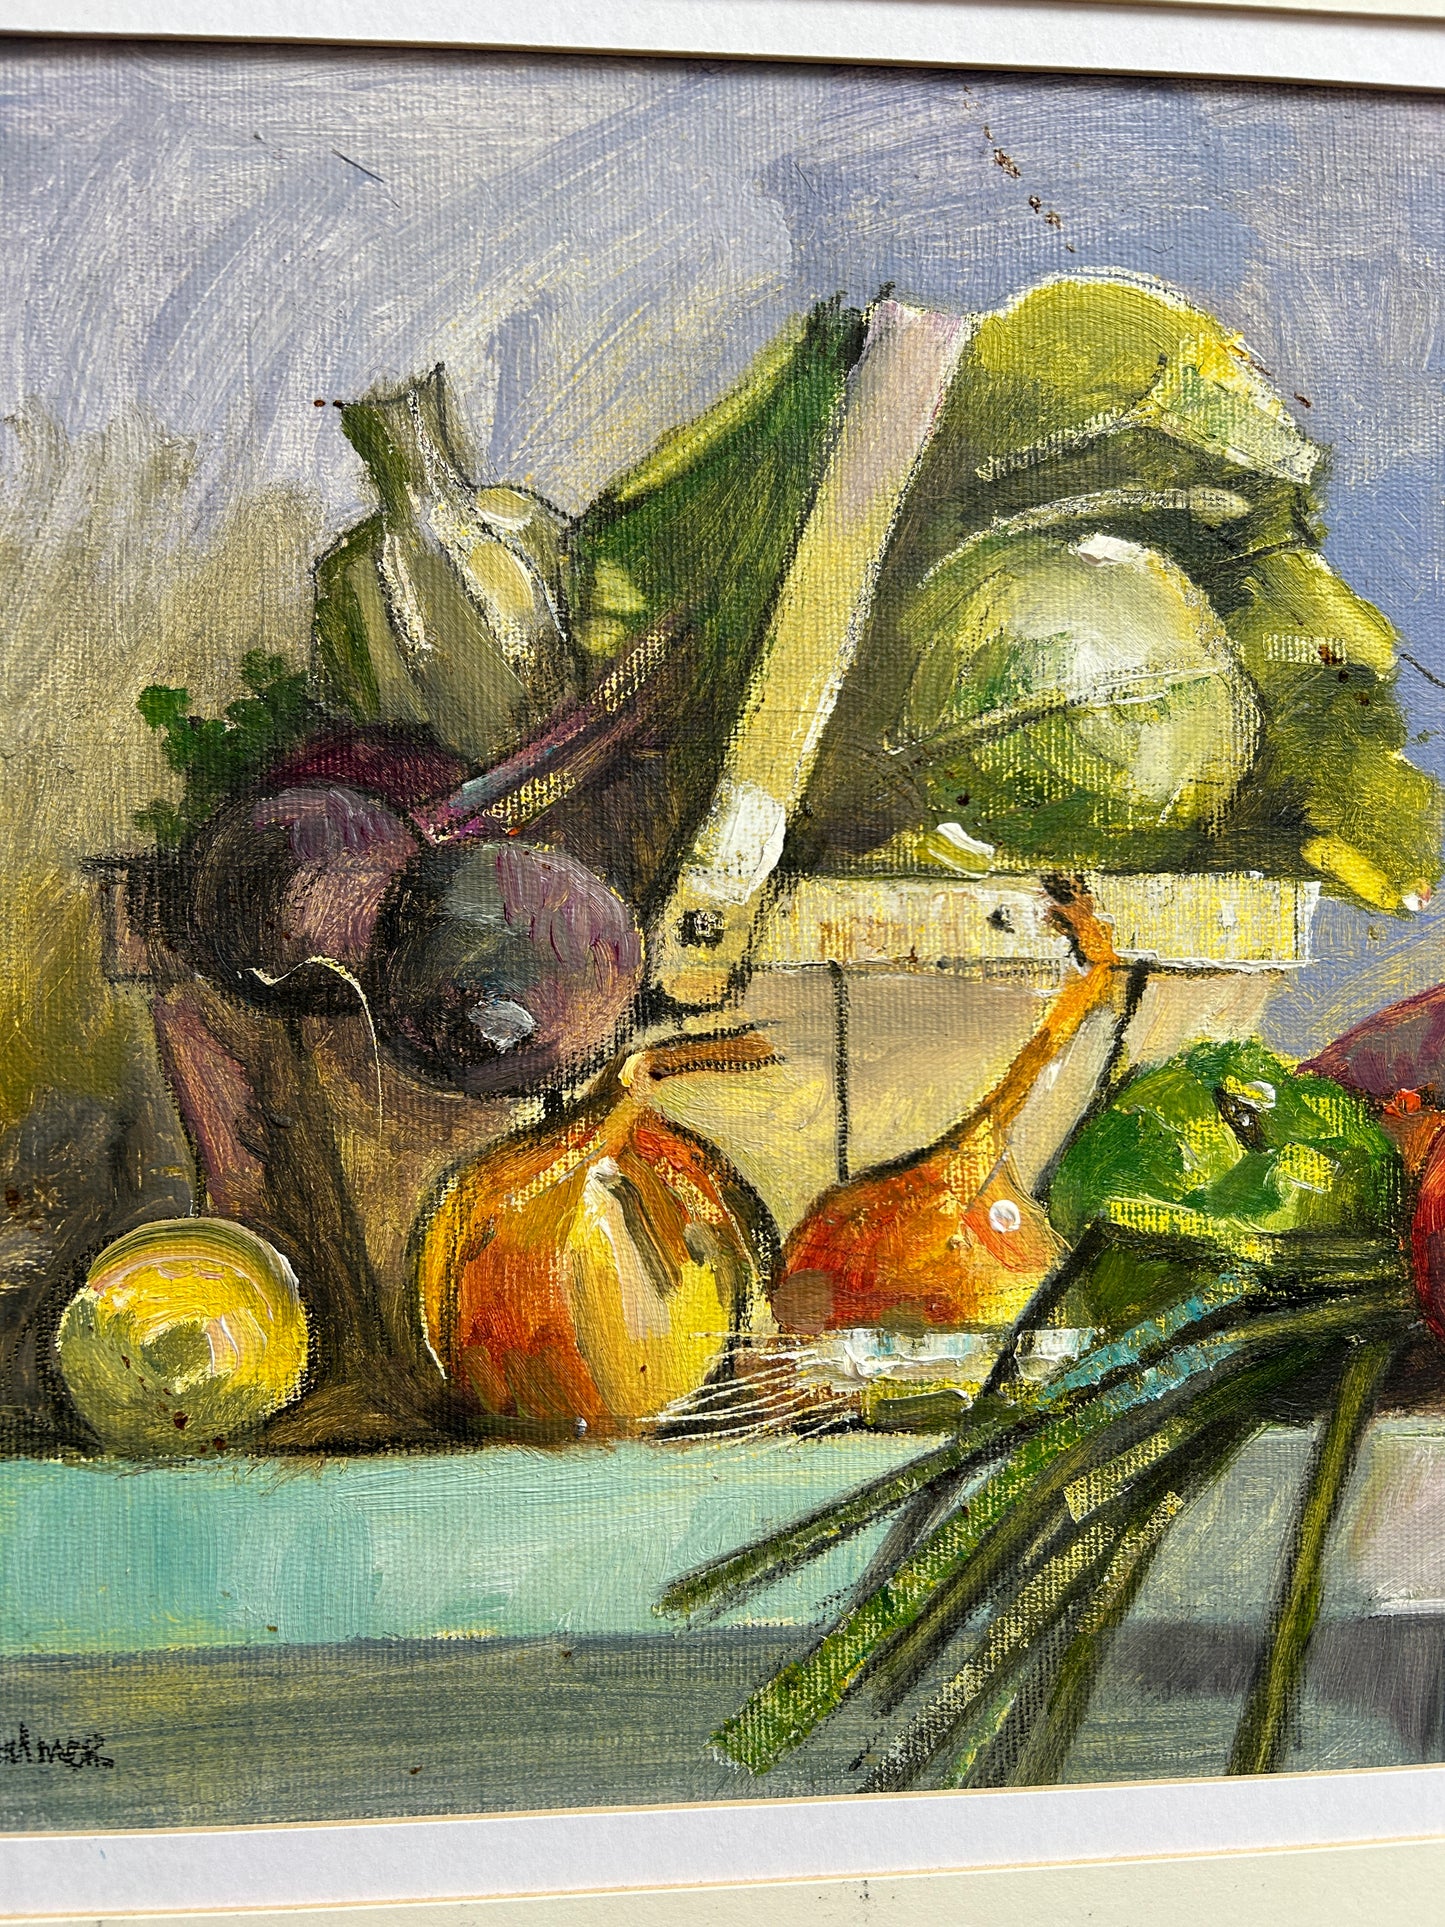 "Vegetables" Oil on Canvas by RA Palmer